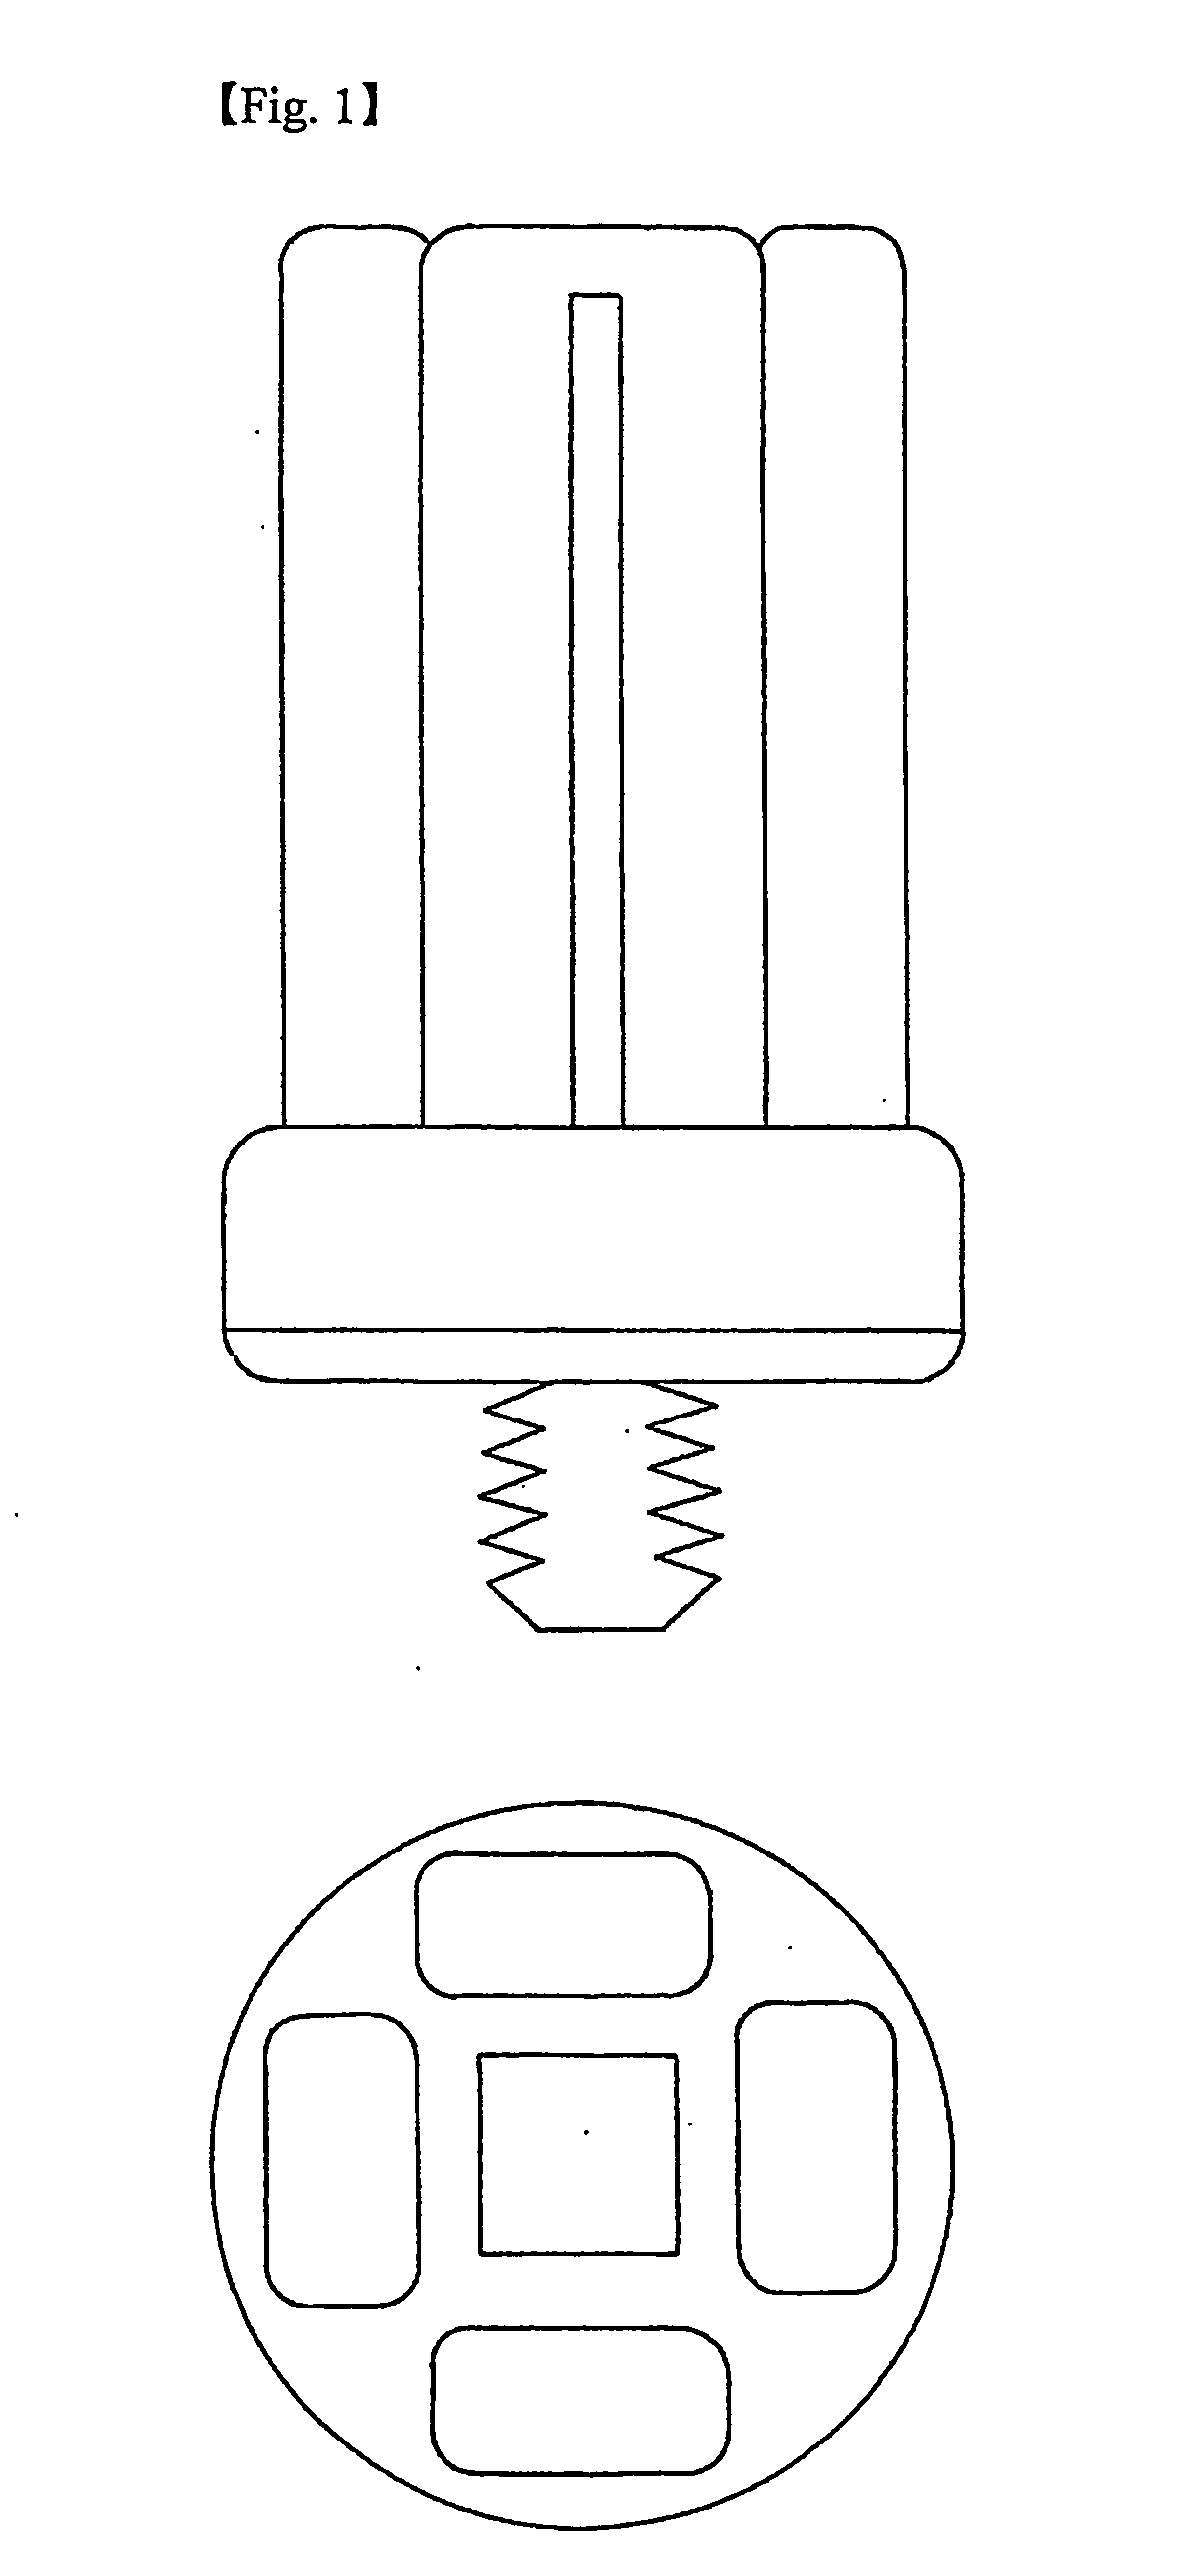 Compact-type discharge lamp